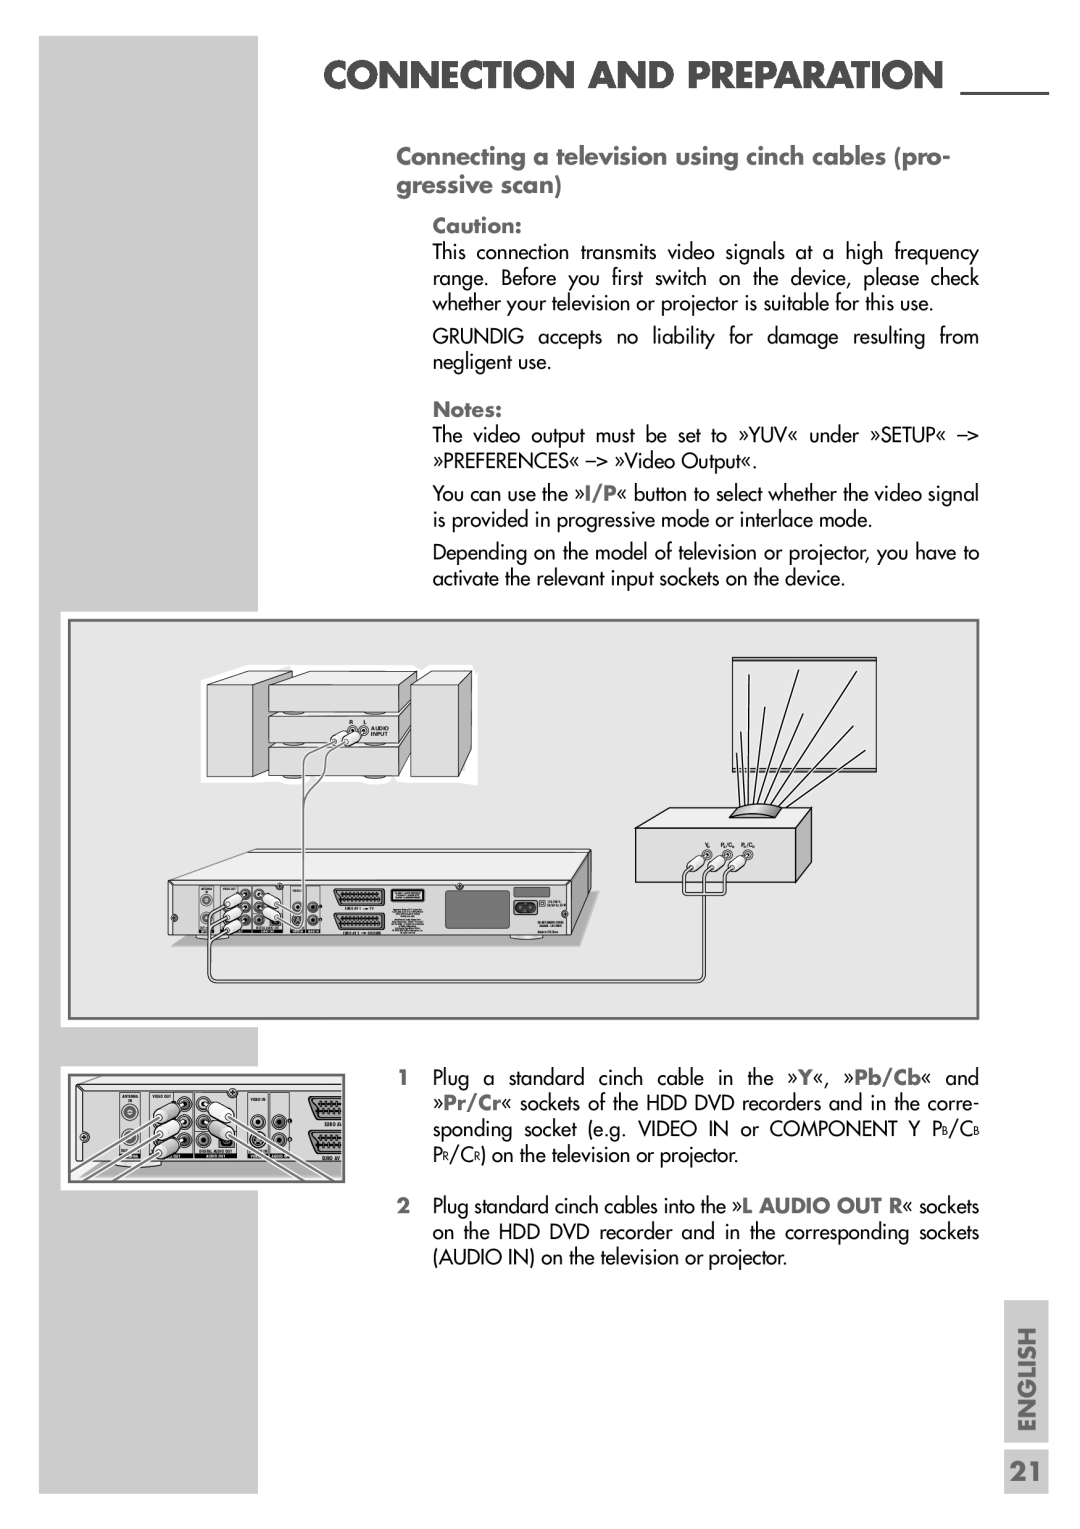 Grundig 5550 HDD manual Connecting a television using cinch cables pro- gressive scan, Connection And Preparation, English 